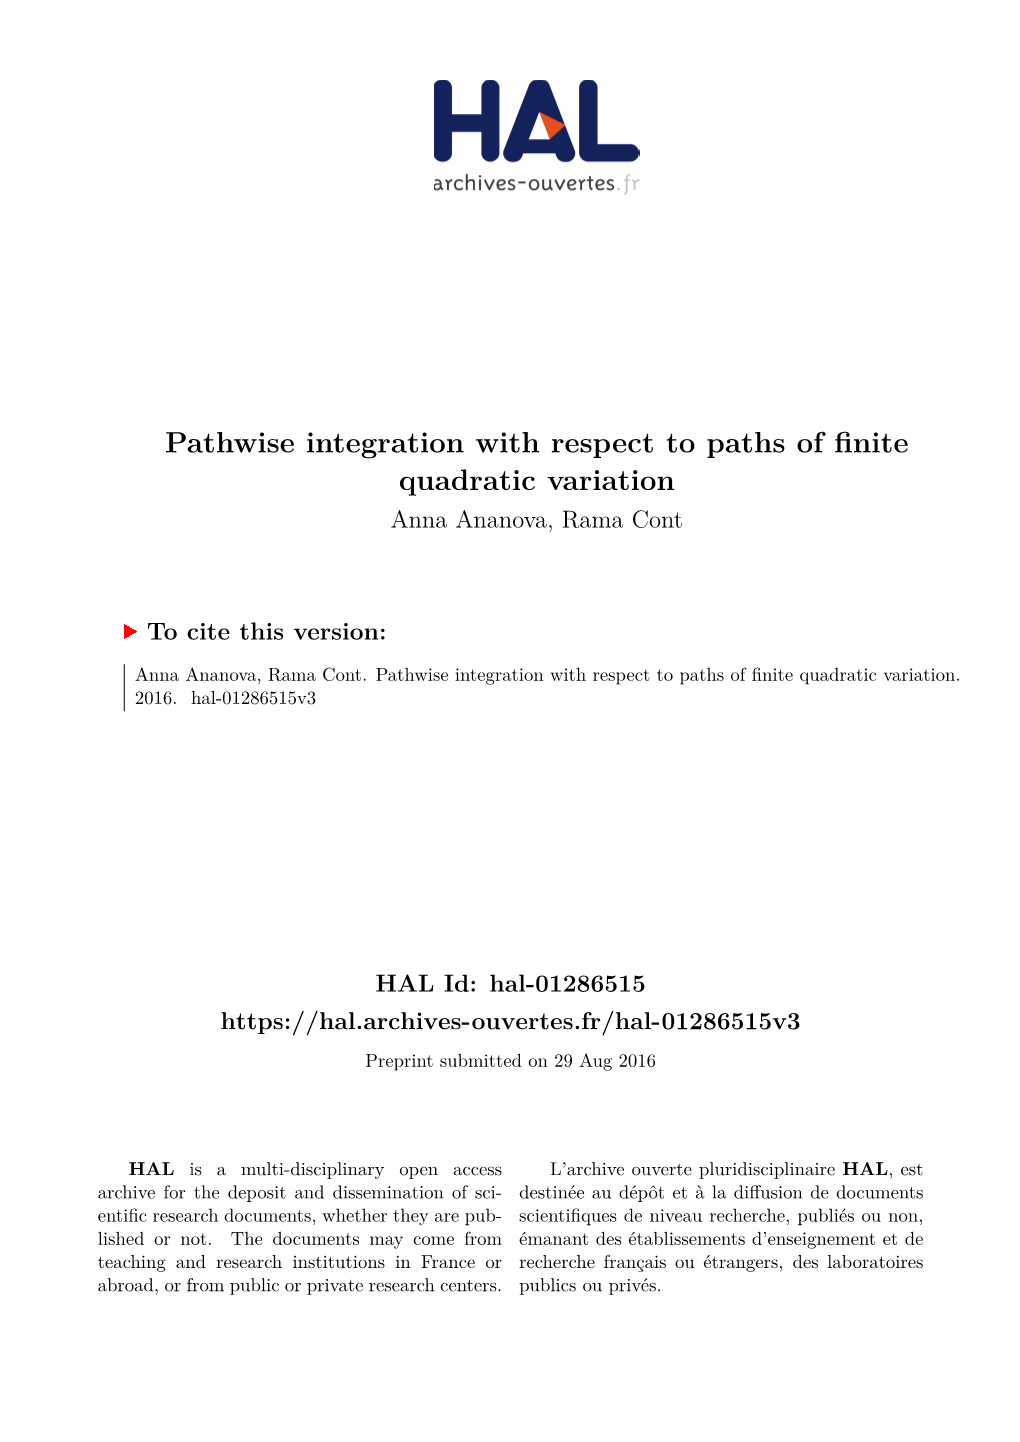 Pathwise Integration with Respect to Paths of Finite Quadratic Variation Anna Ananova, Rama Cont